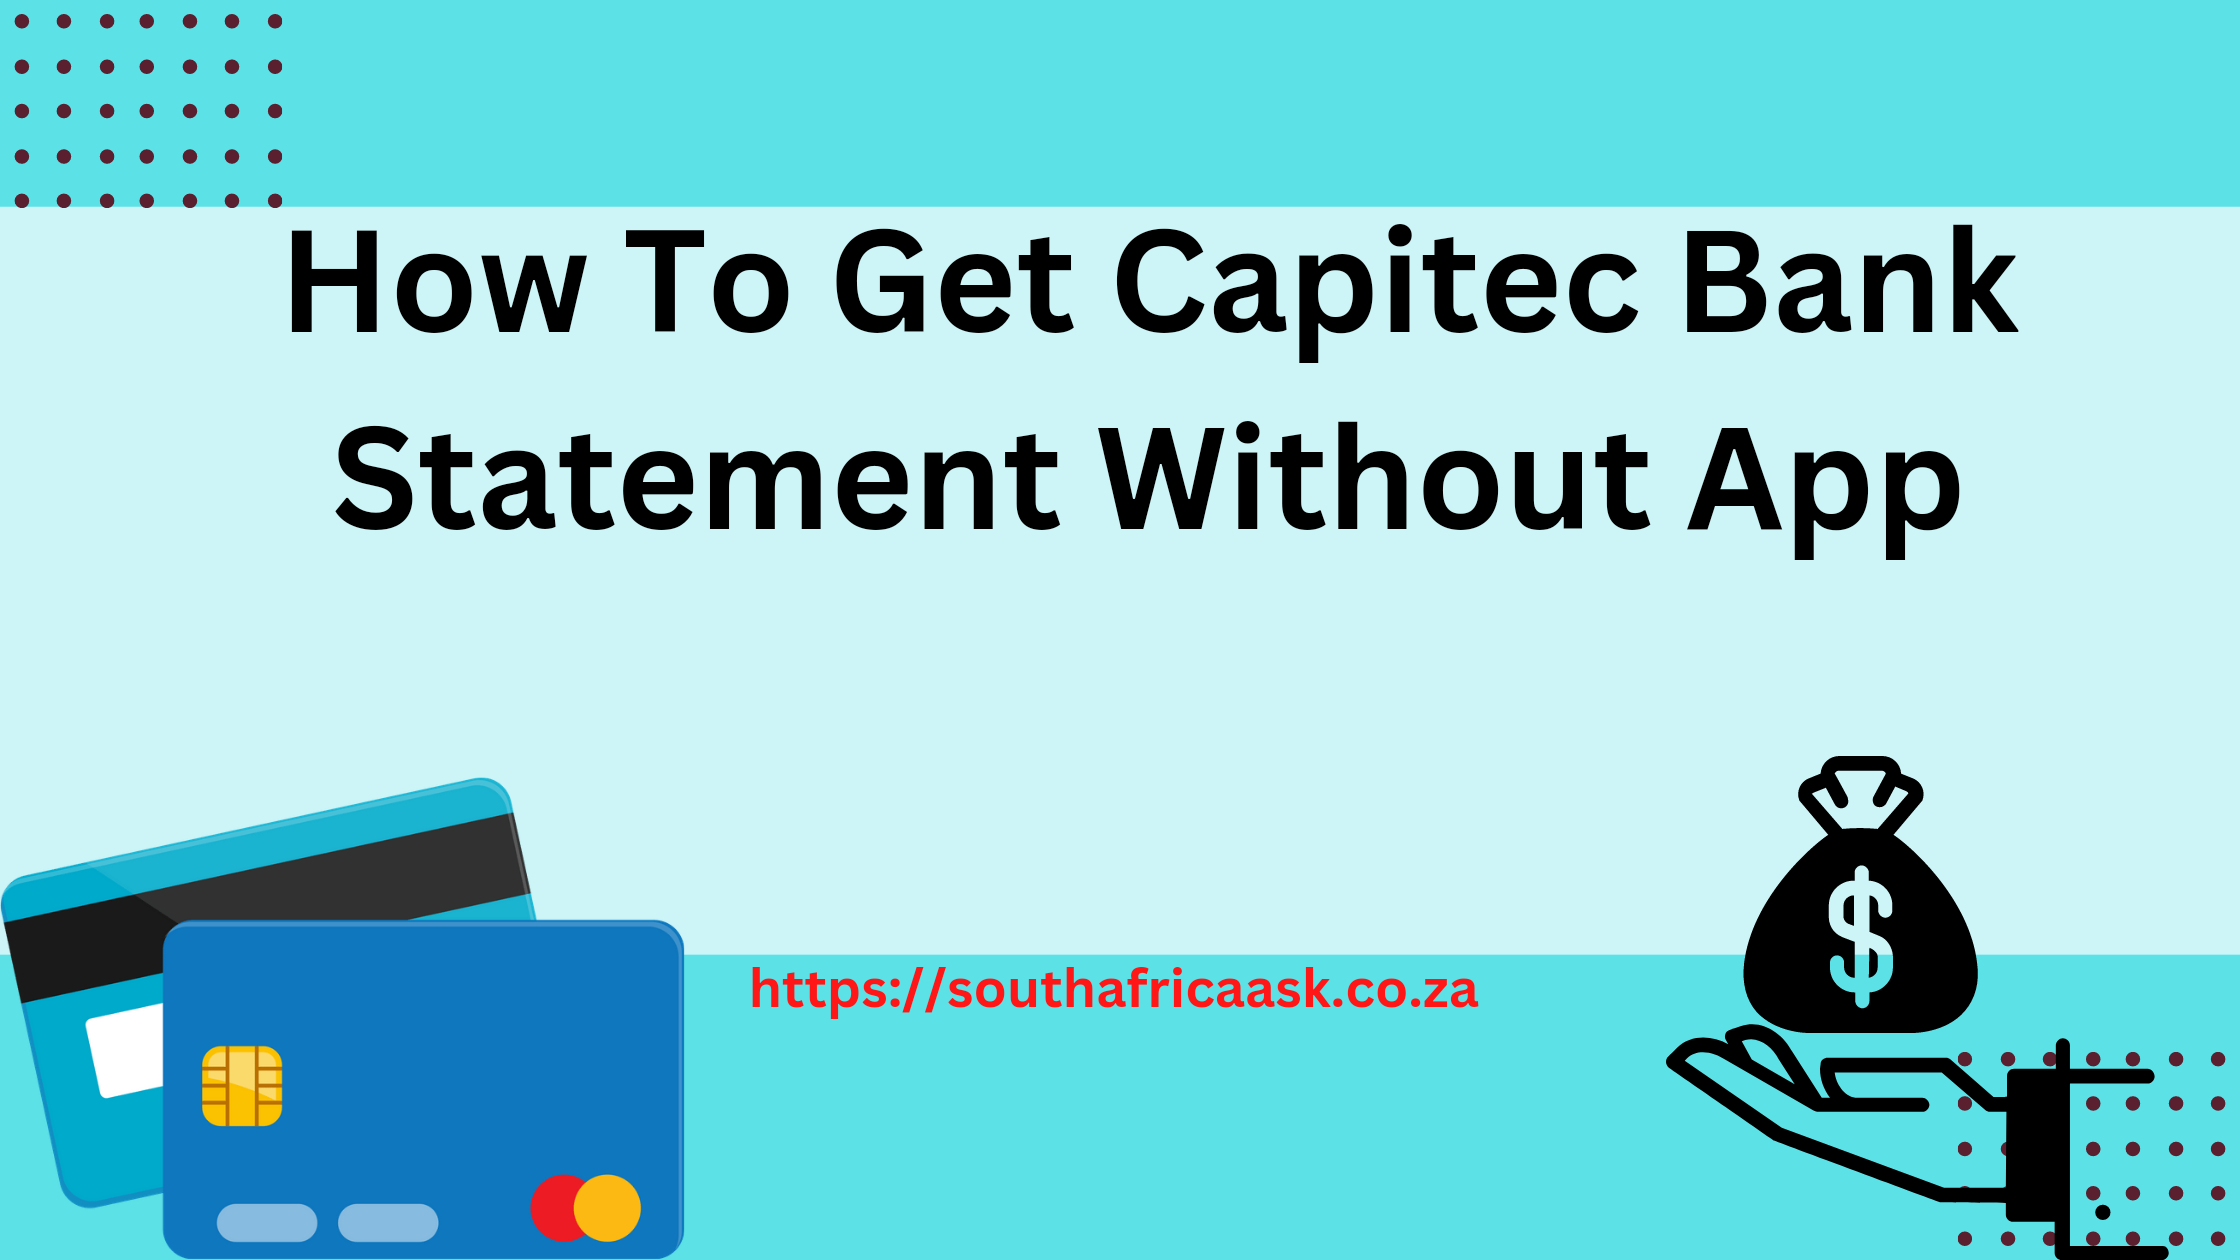 How To Get Capitec Bank Statement Without App